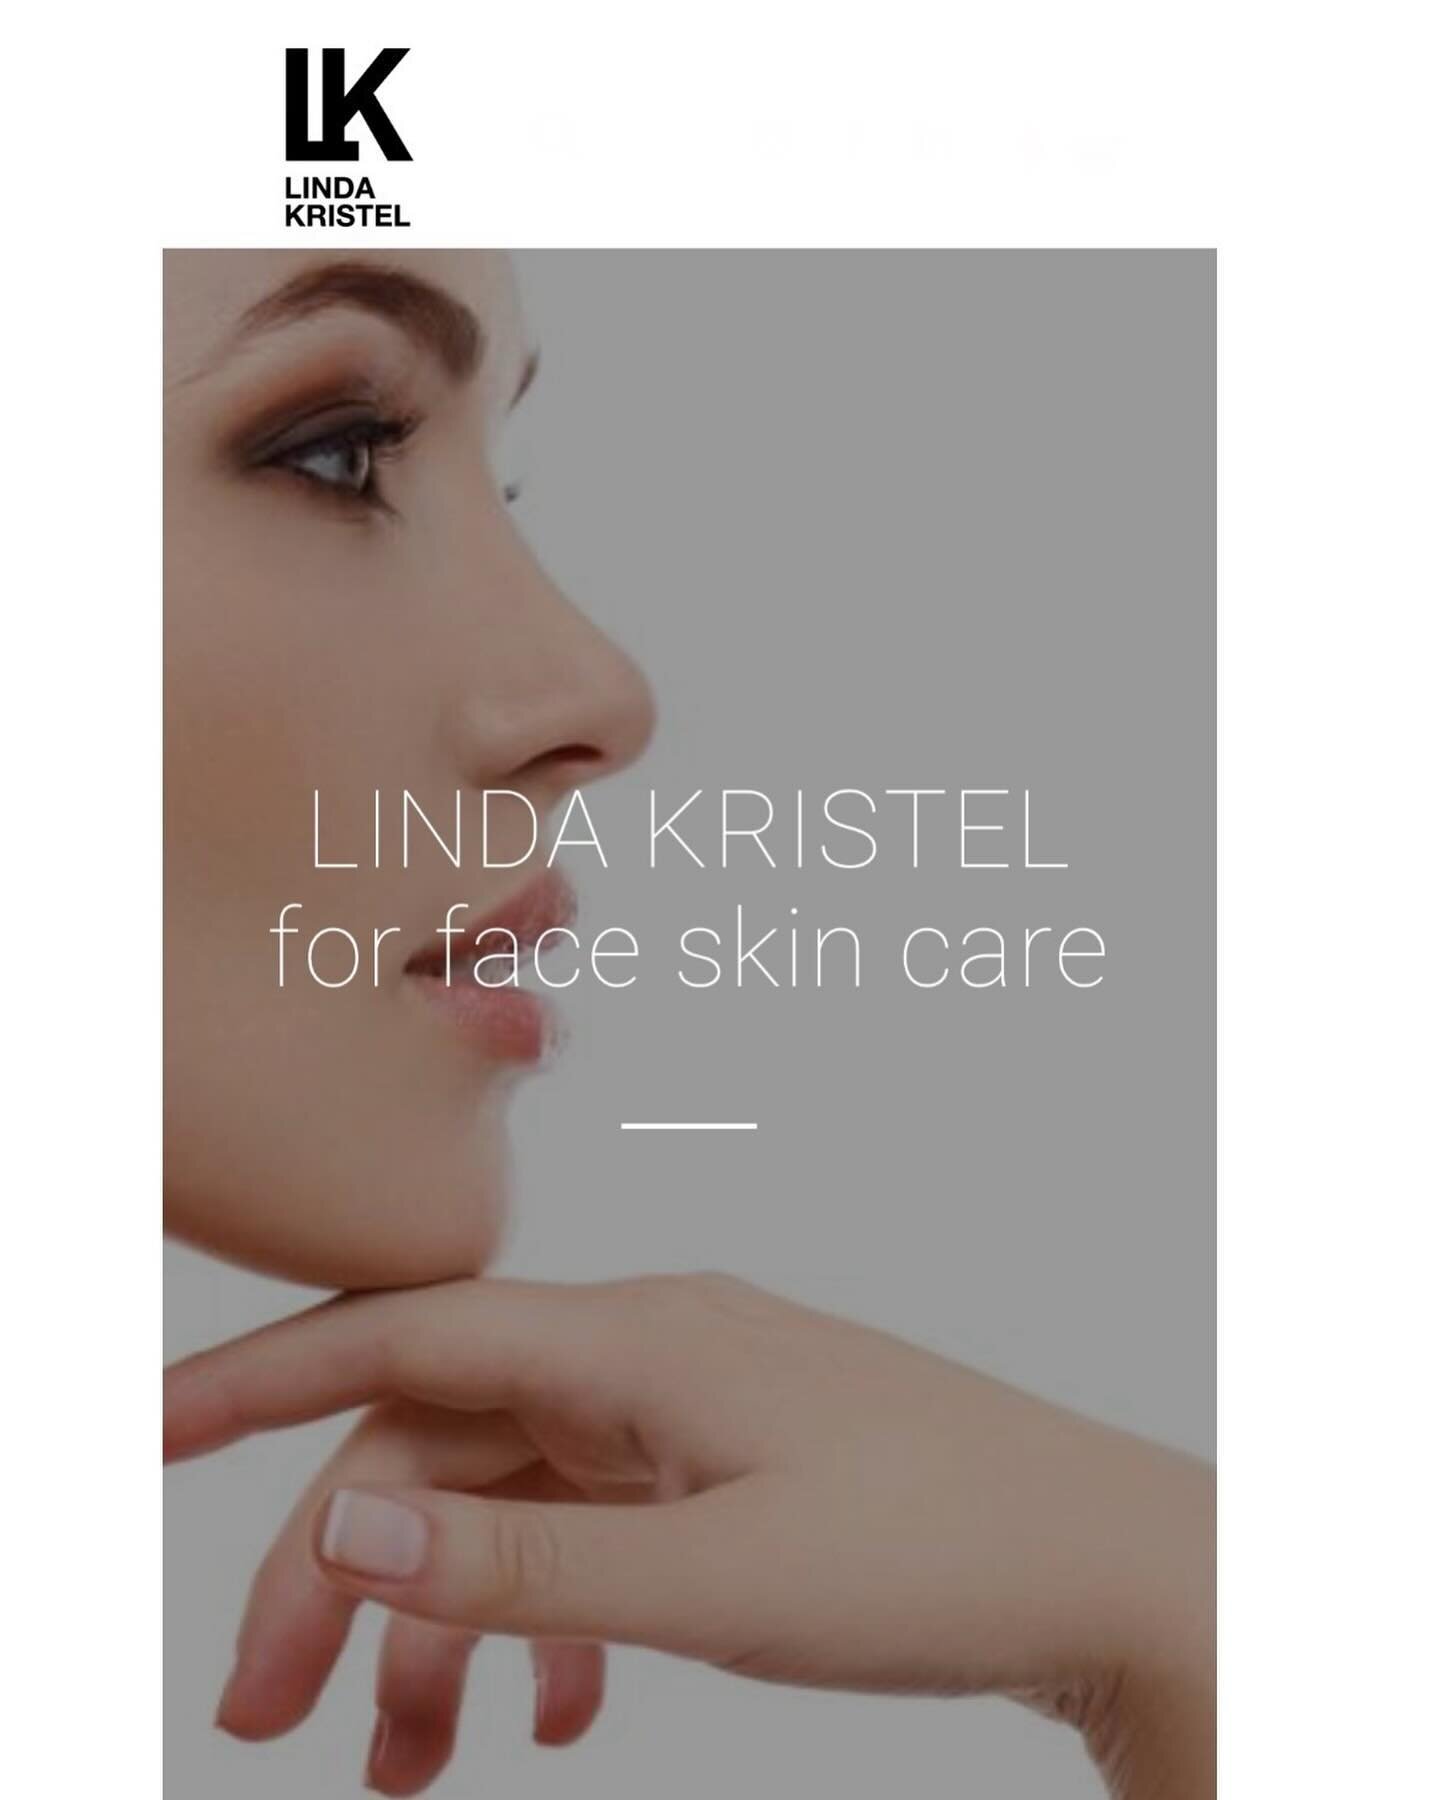 Introducing 
Linda Kristel Skincare 

Exclusively at Carol Anne

The Caviar Rejuvination Facial 

This lifting, anti-aging luxurious facial features Black Caviar for regeneration and vitality, and includes triple cleansing with a peel, mask and a mas